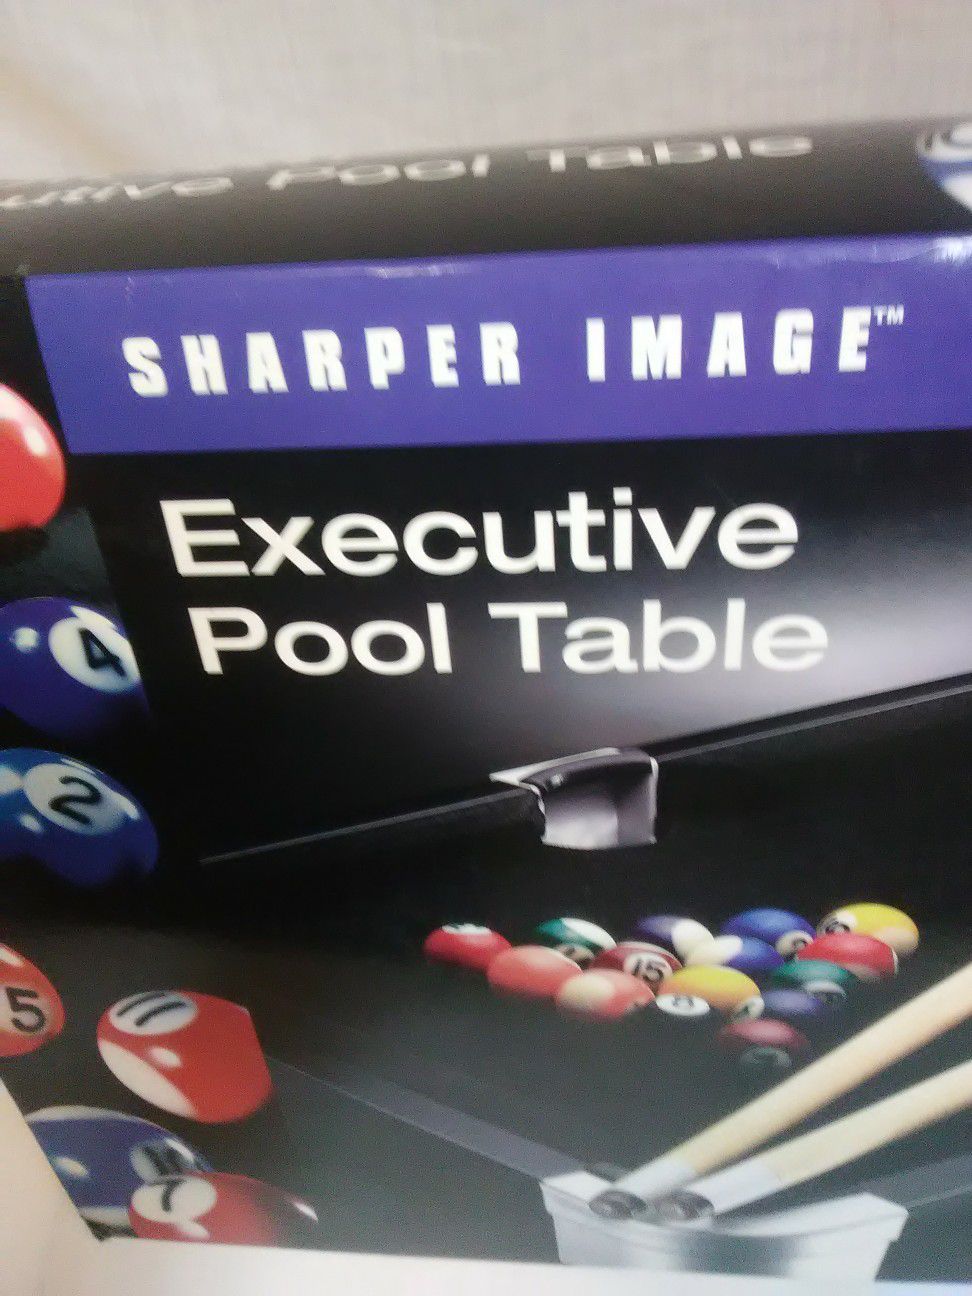 Miniature Pool Table by Sharper Image